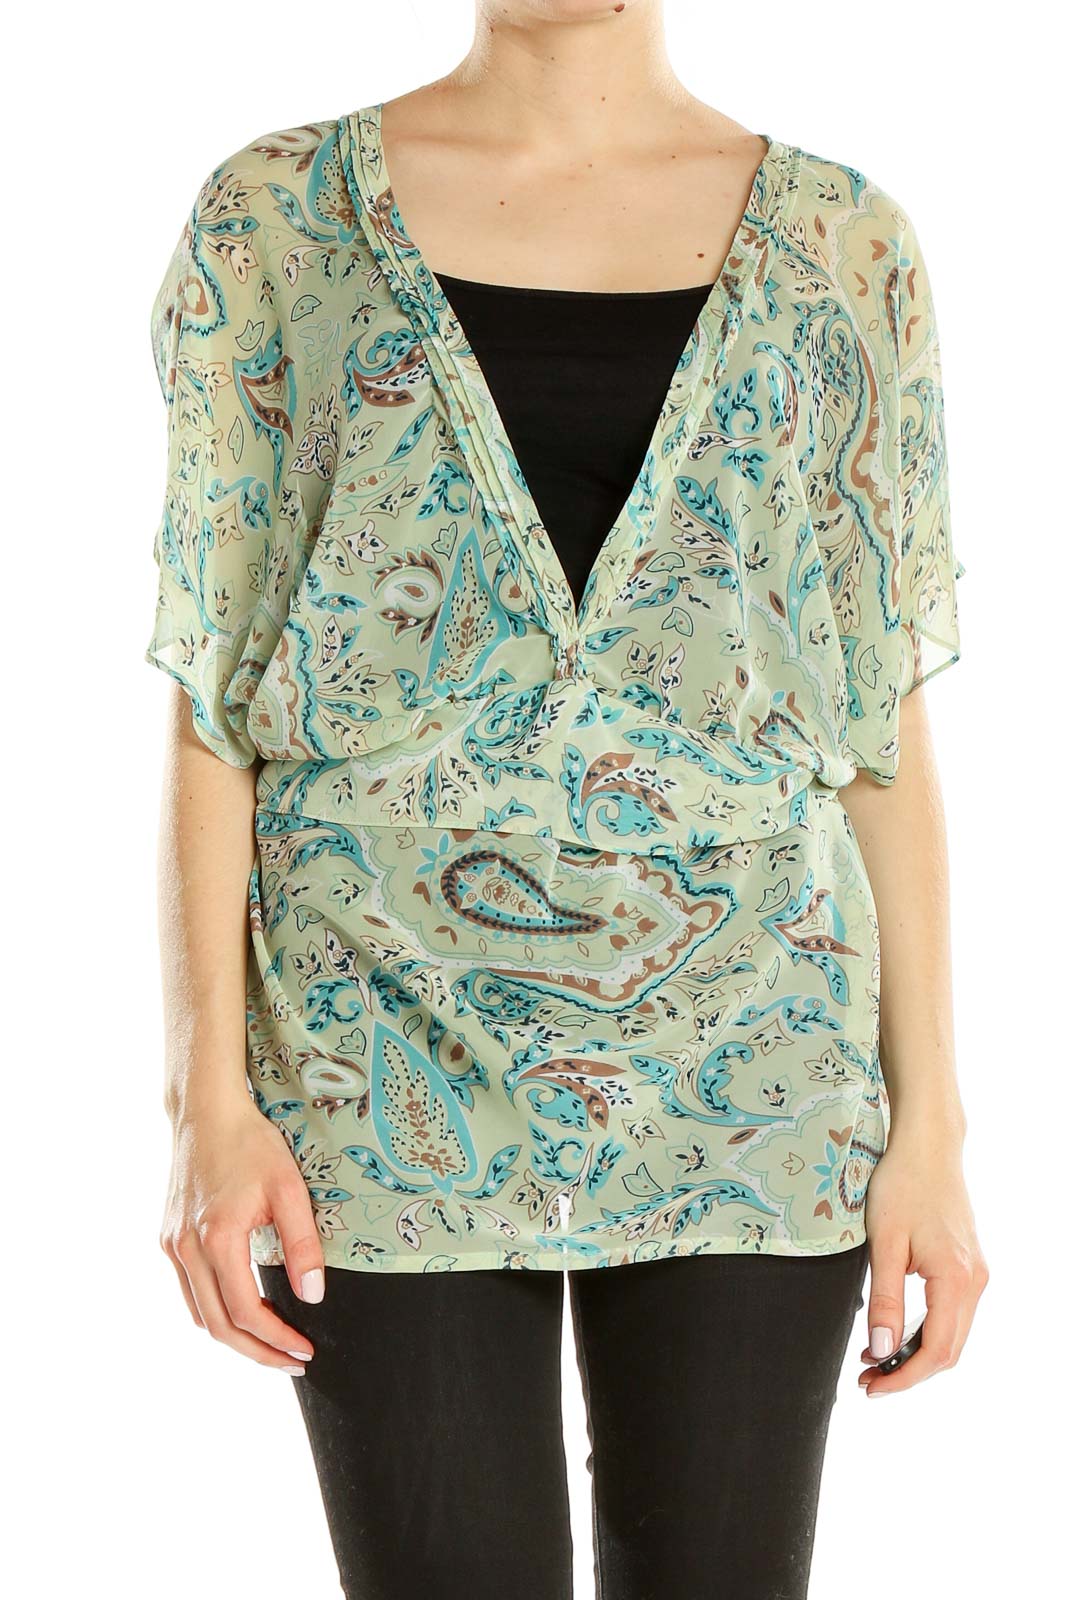 Green Paisley Top Front